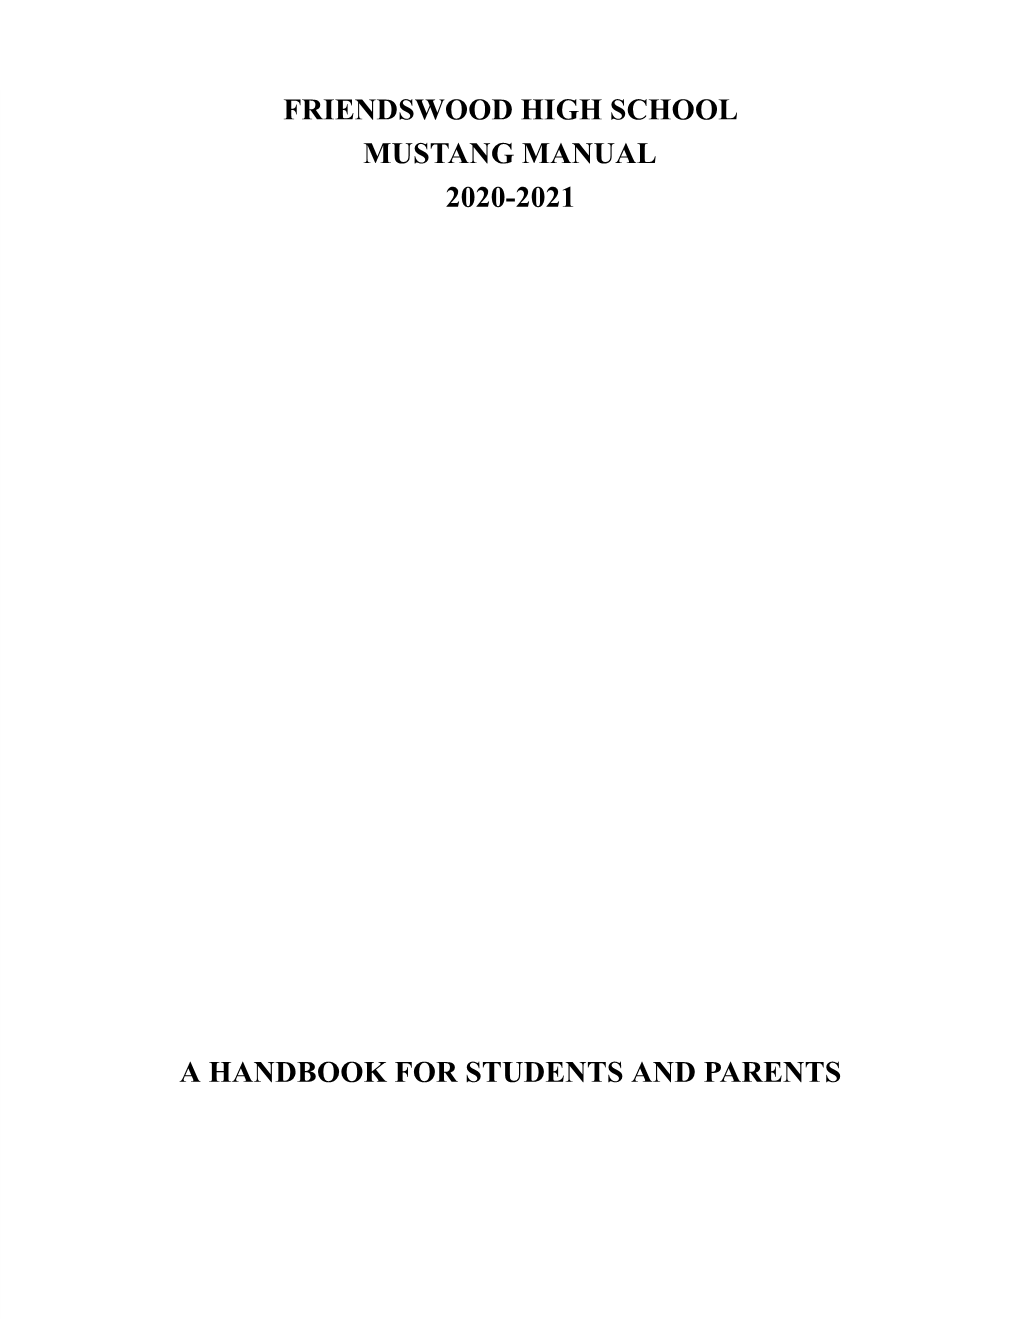 A Handbook for Students and Parents Friendswood High School Mustang Manual